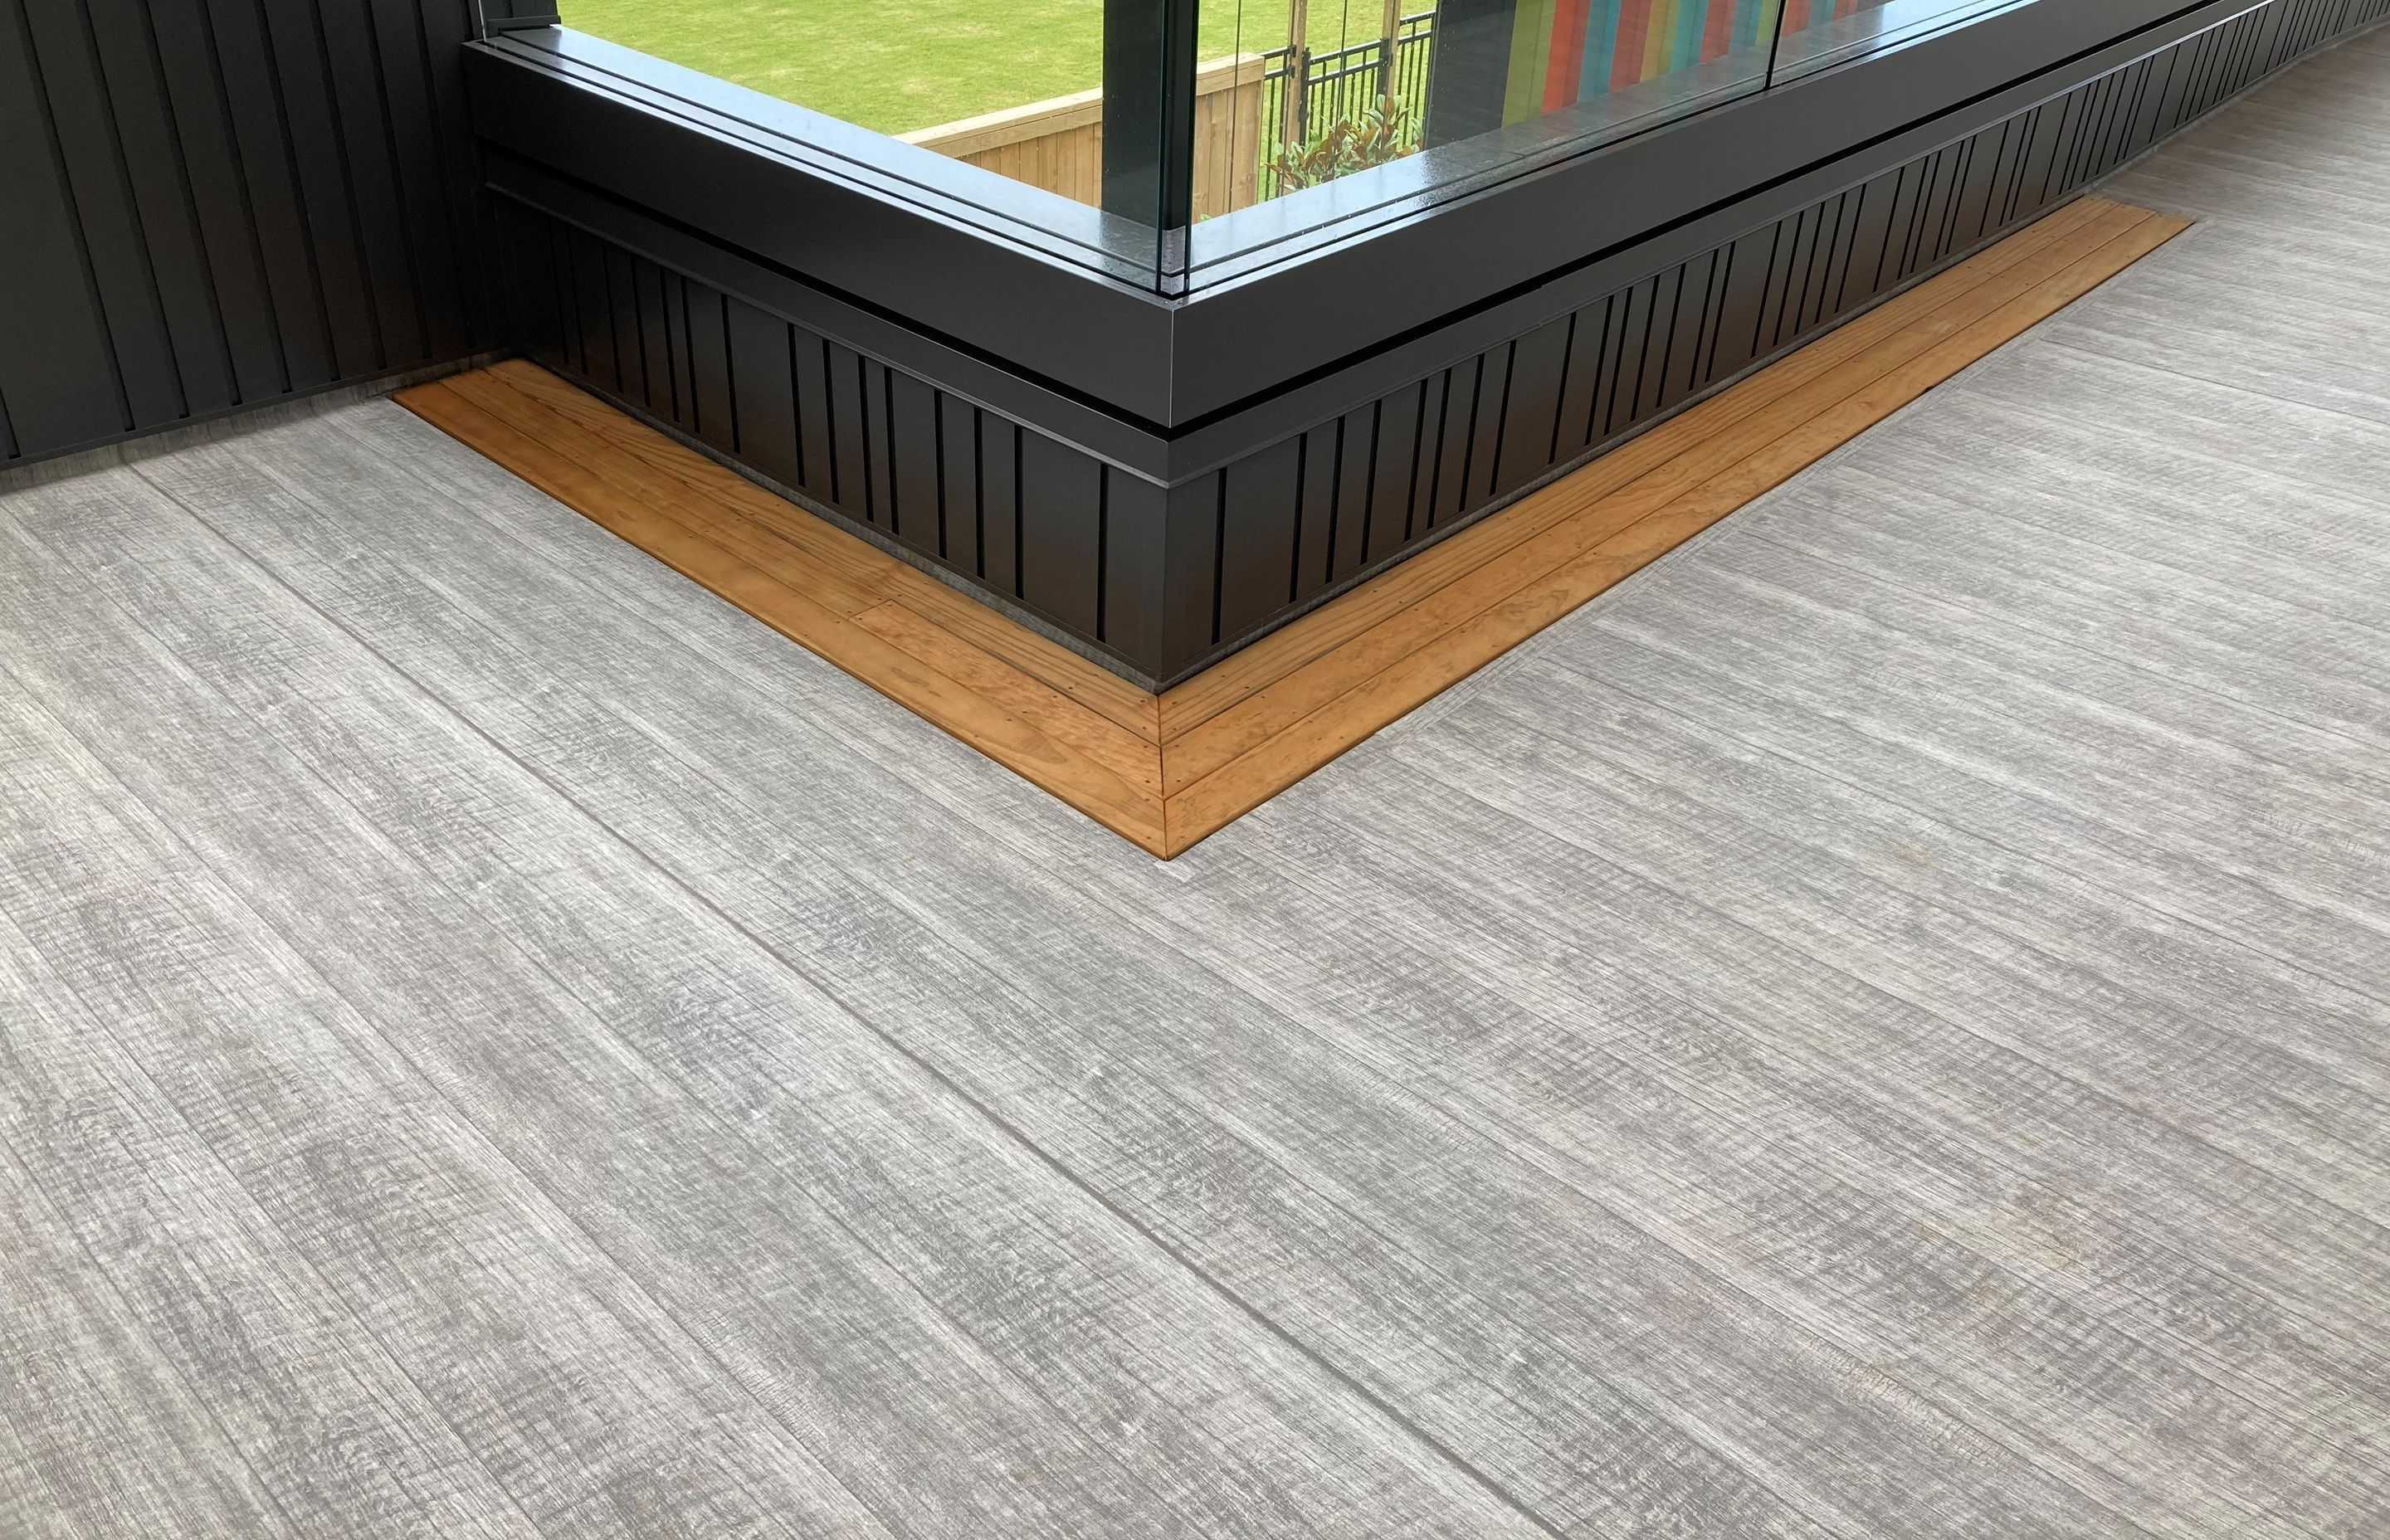 Viking Dec-K-ing waterproofing membrane is available in five pebble-look finishes and two timber-look finishes—Prairie Barn (pictured) and Country Cottage.